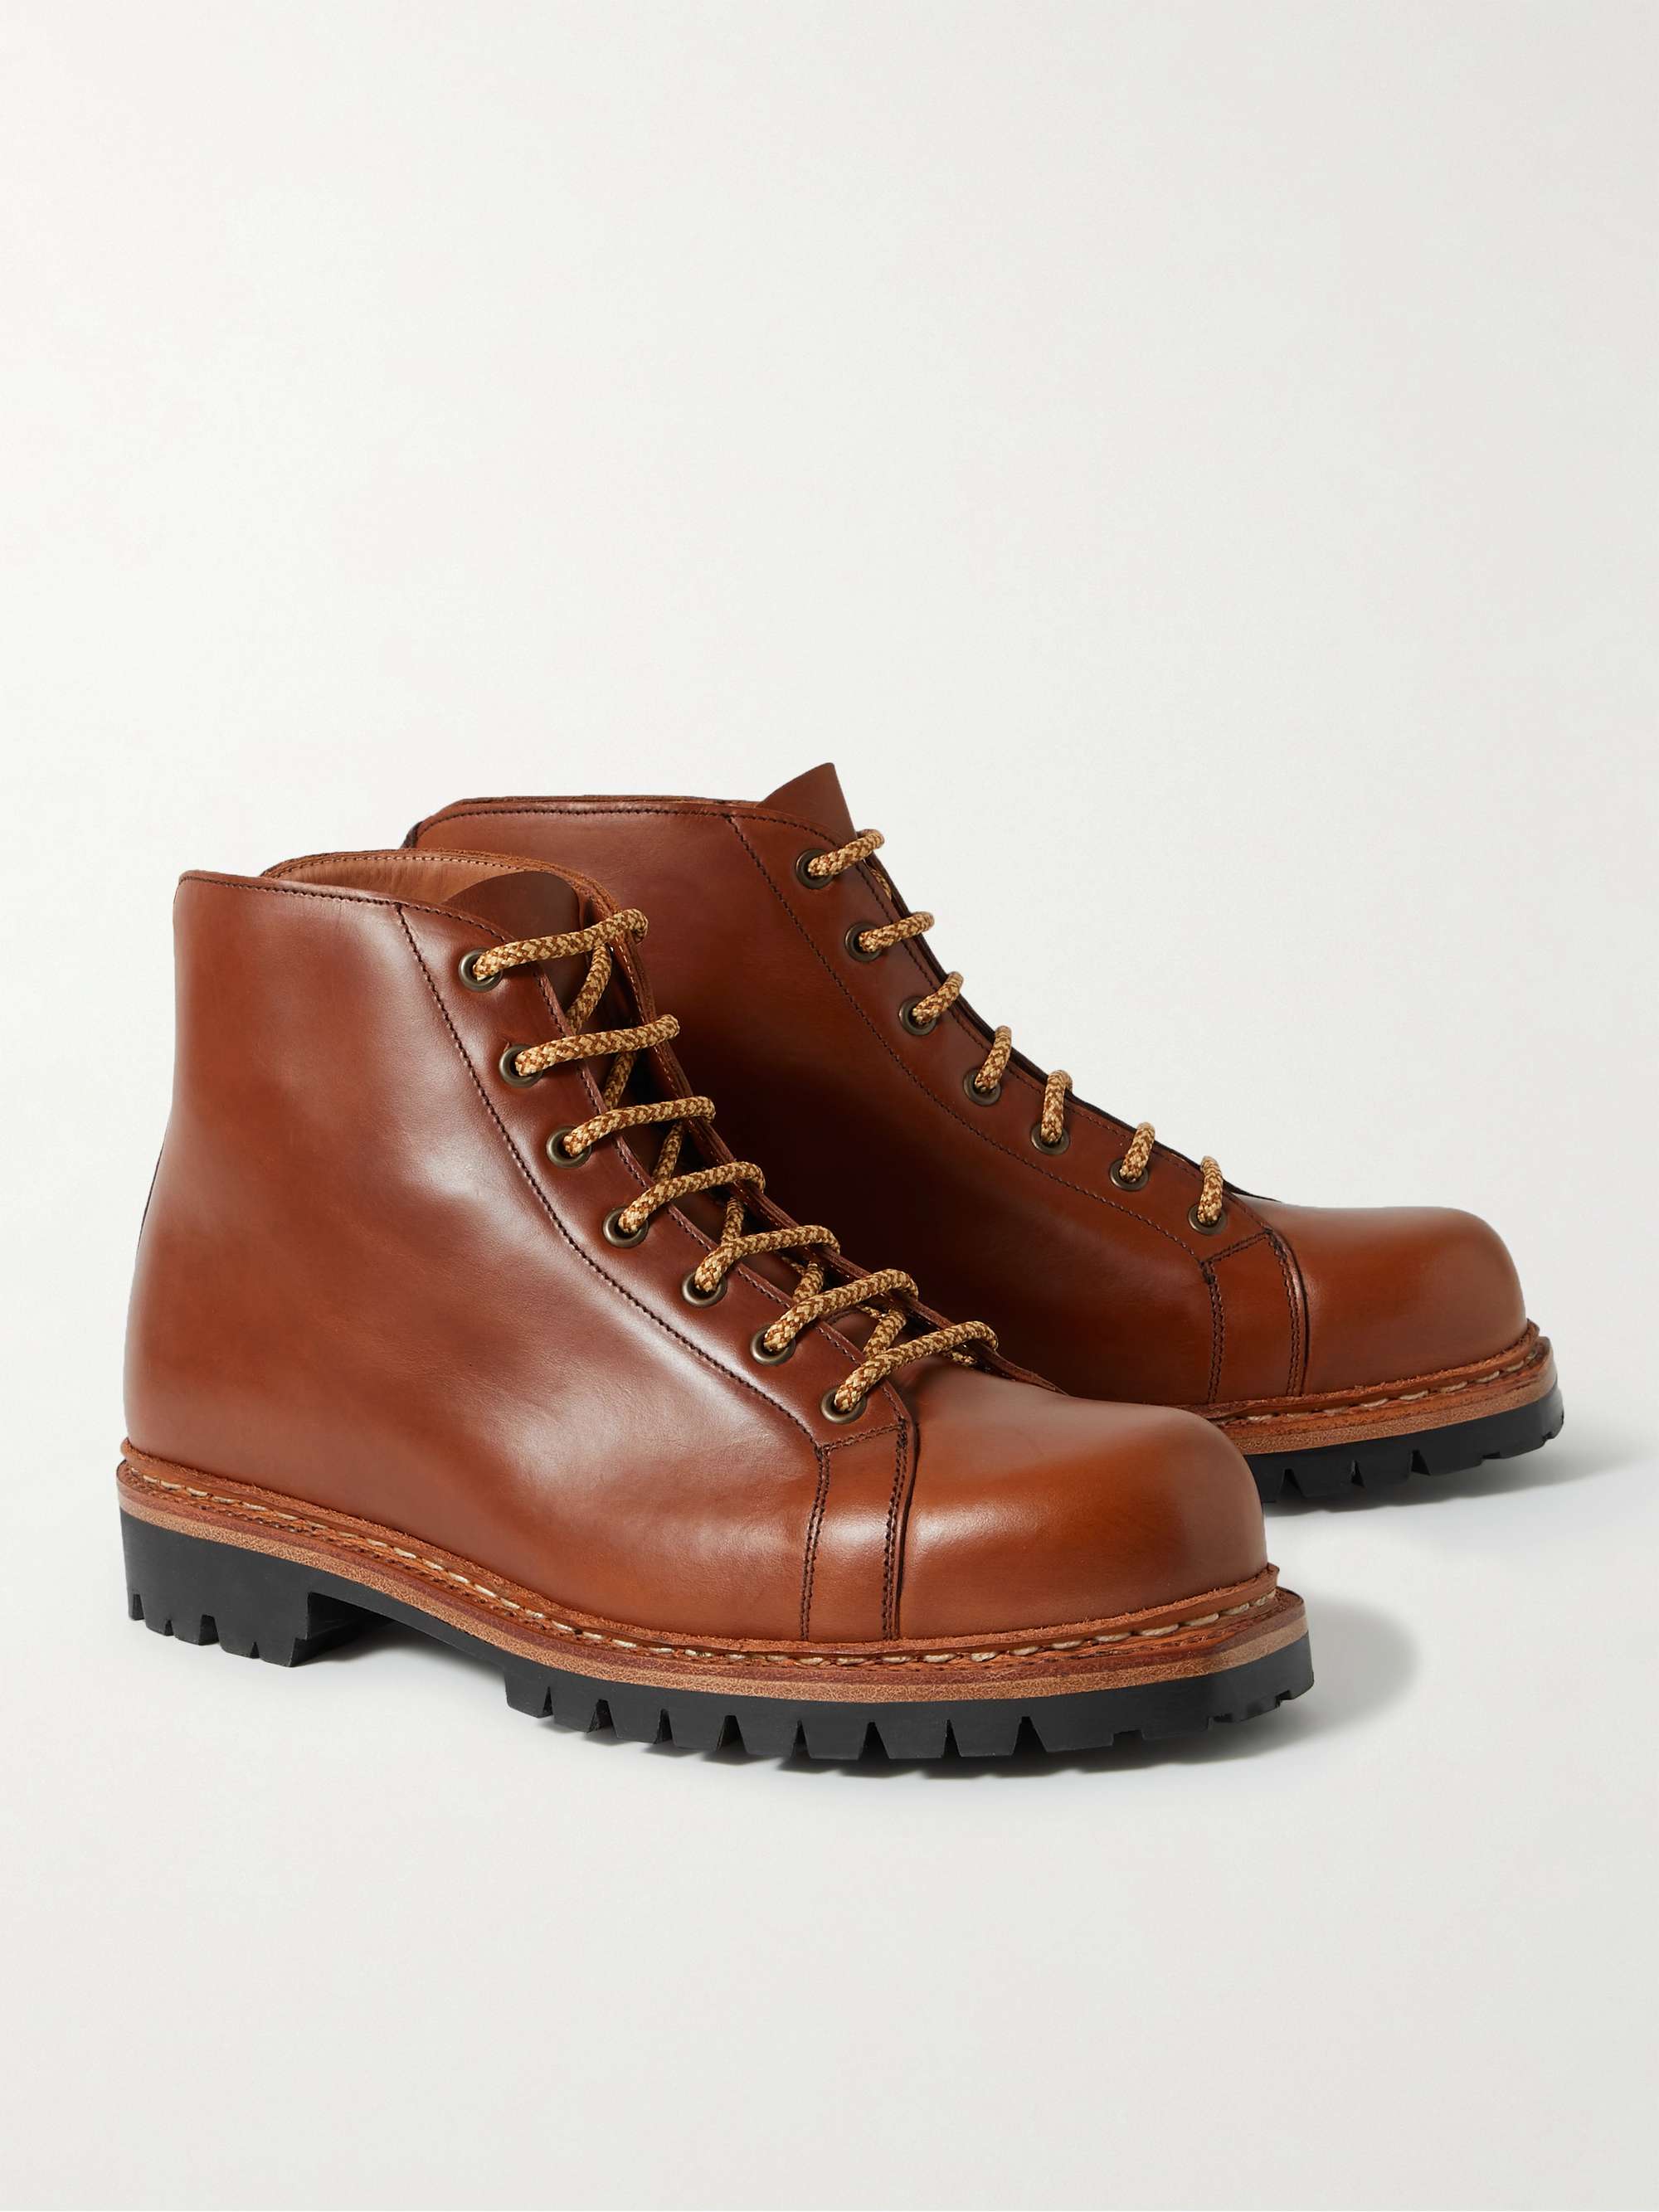 GEORGE CLEVERLEY Edmund Leather Boots